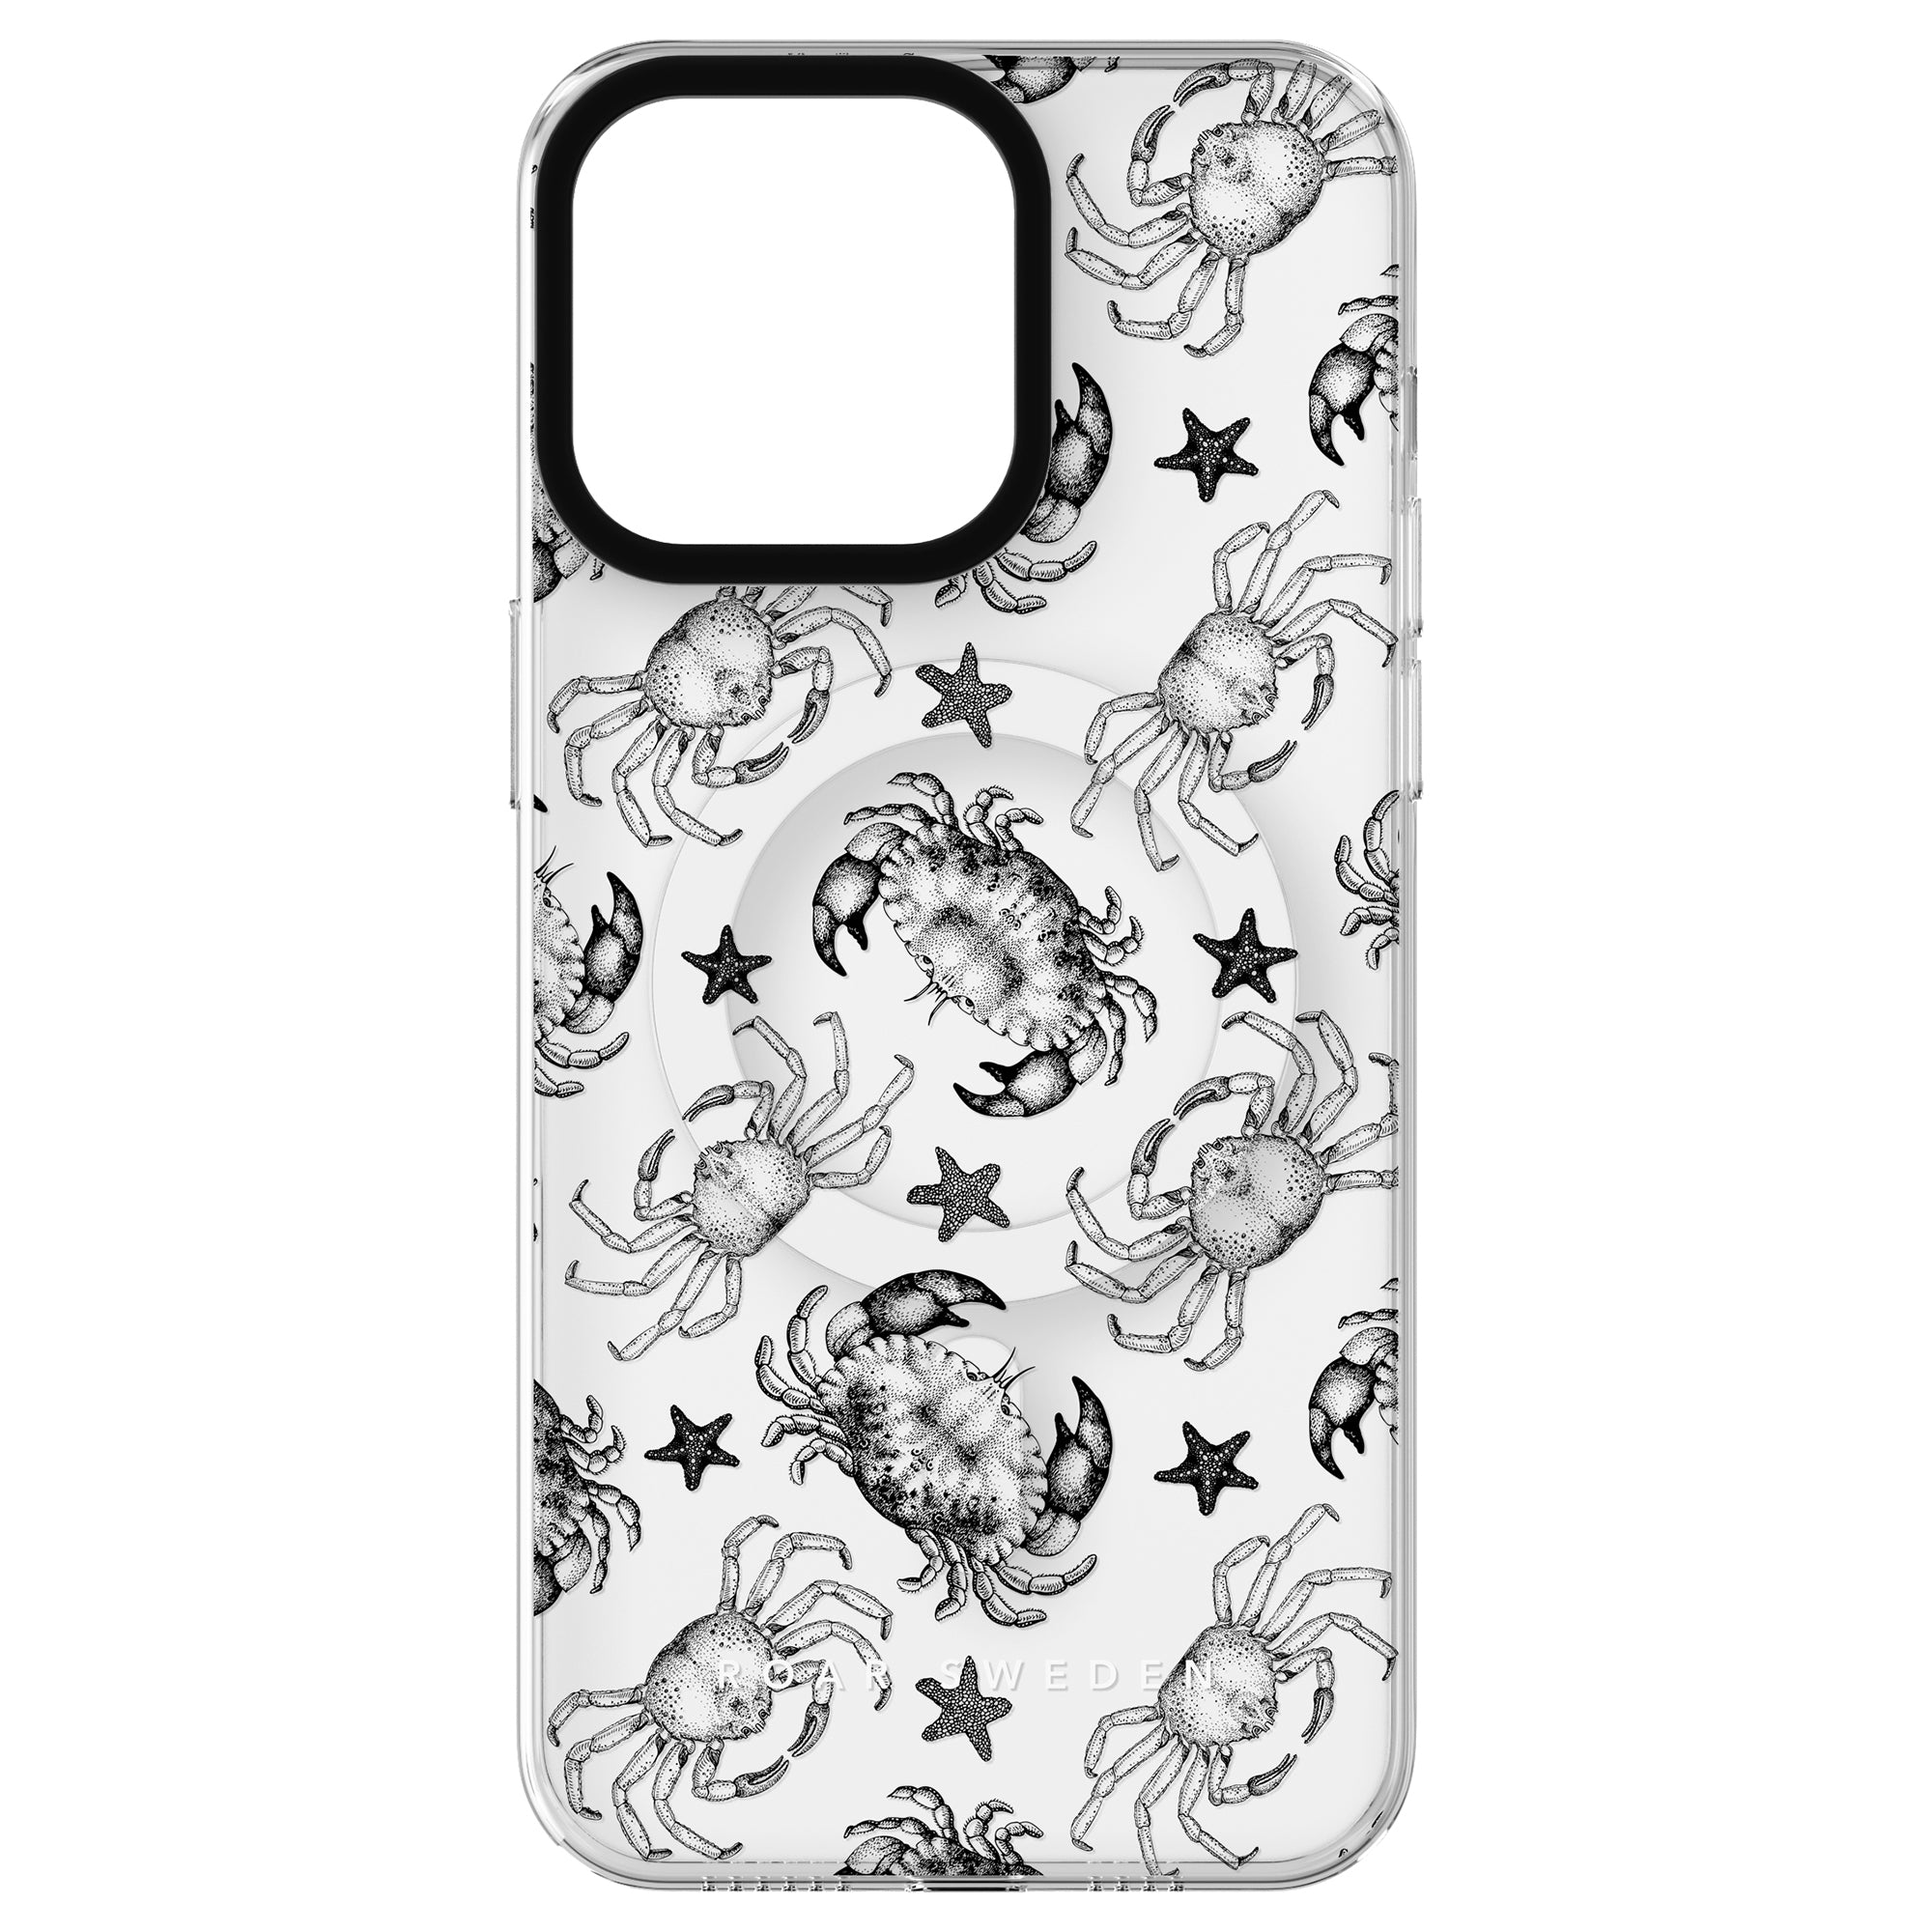 Introducing the Ocean Collection: a clear phone case adorned with black and white illustrations of crabs and starfish. This stylish smartphone accessory, also known as the Black Crab - MagSafe, adds a touch of marine elegance to your device while ensuring protection.